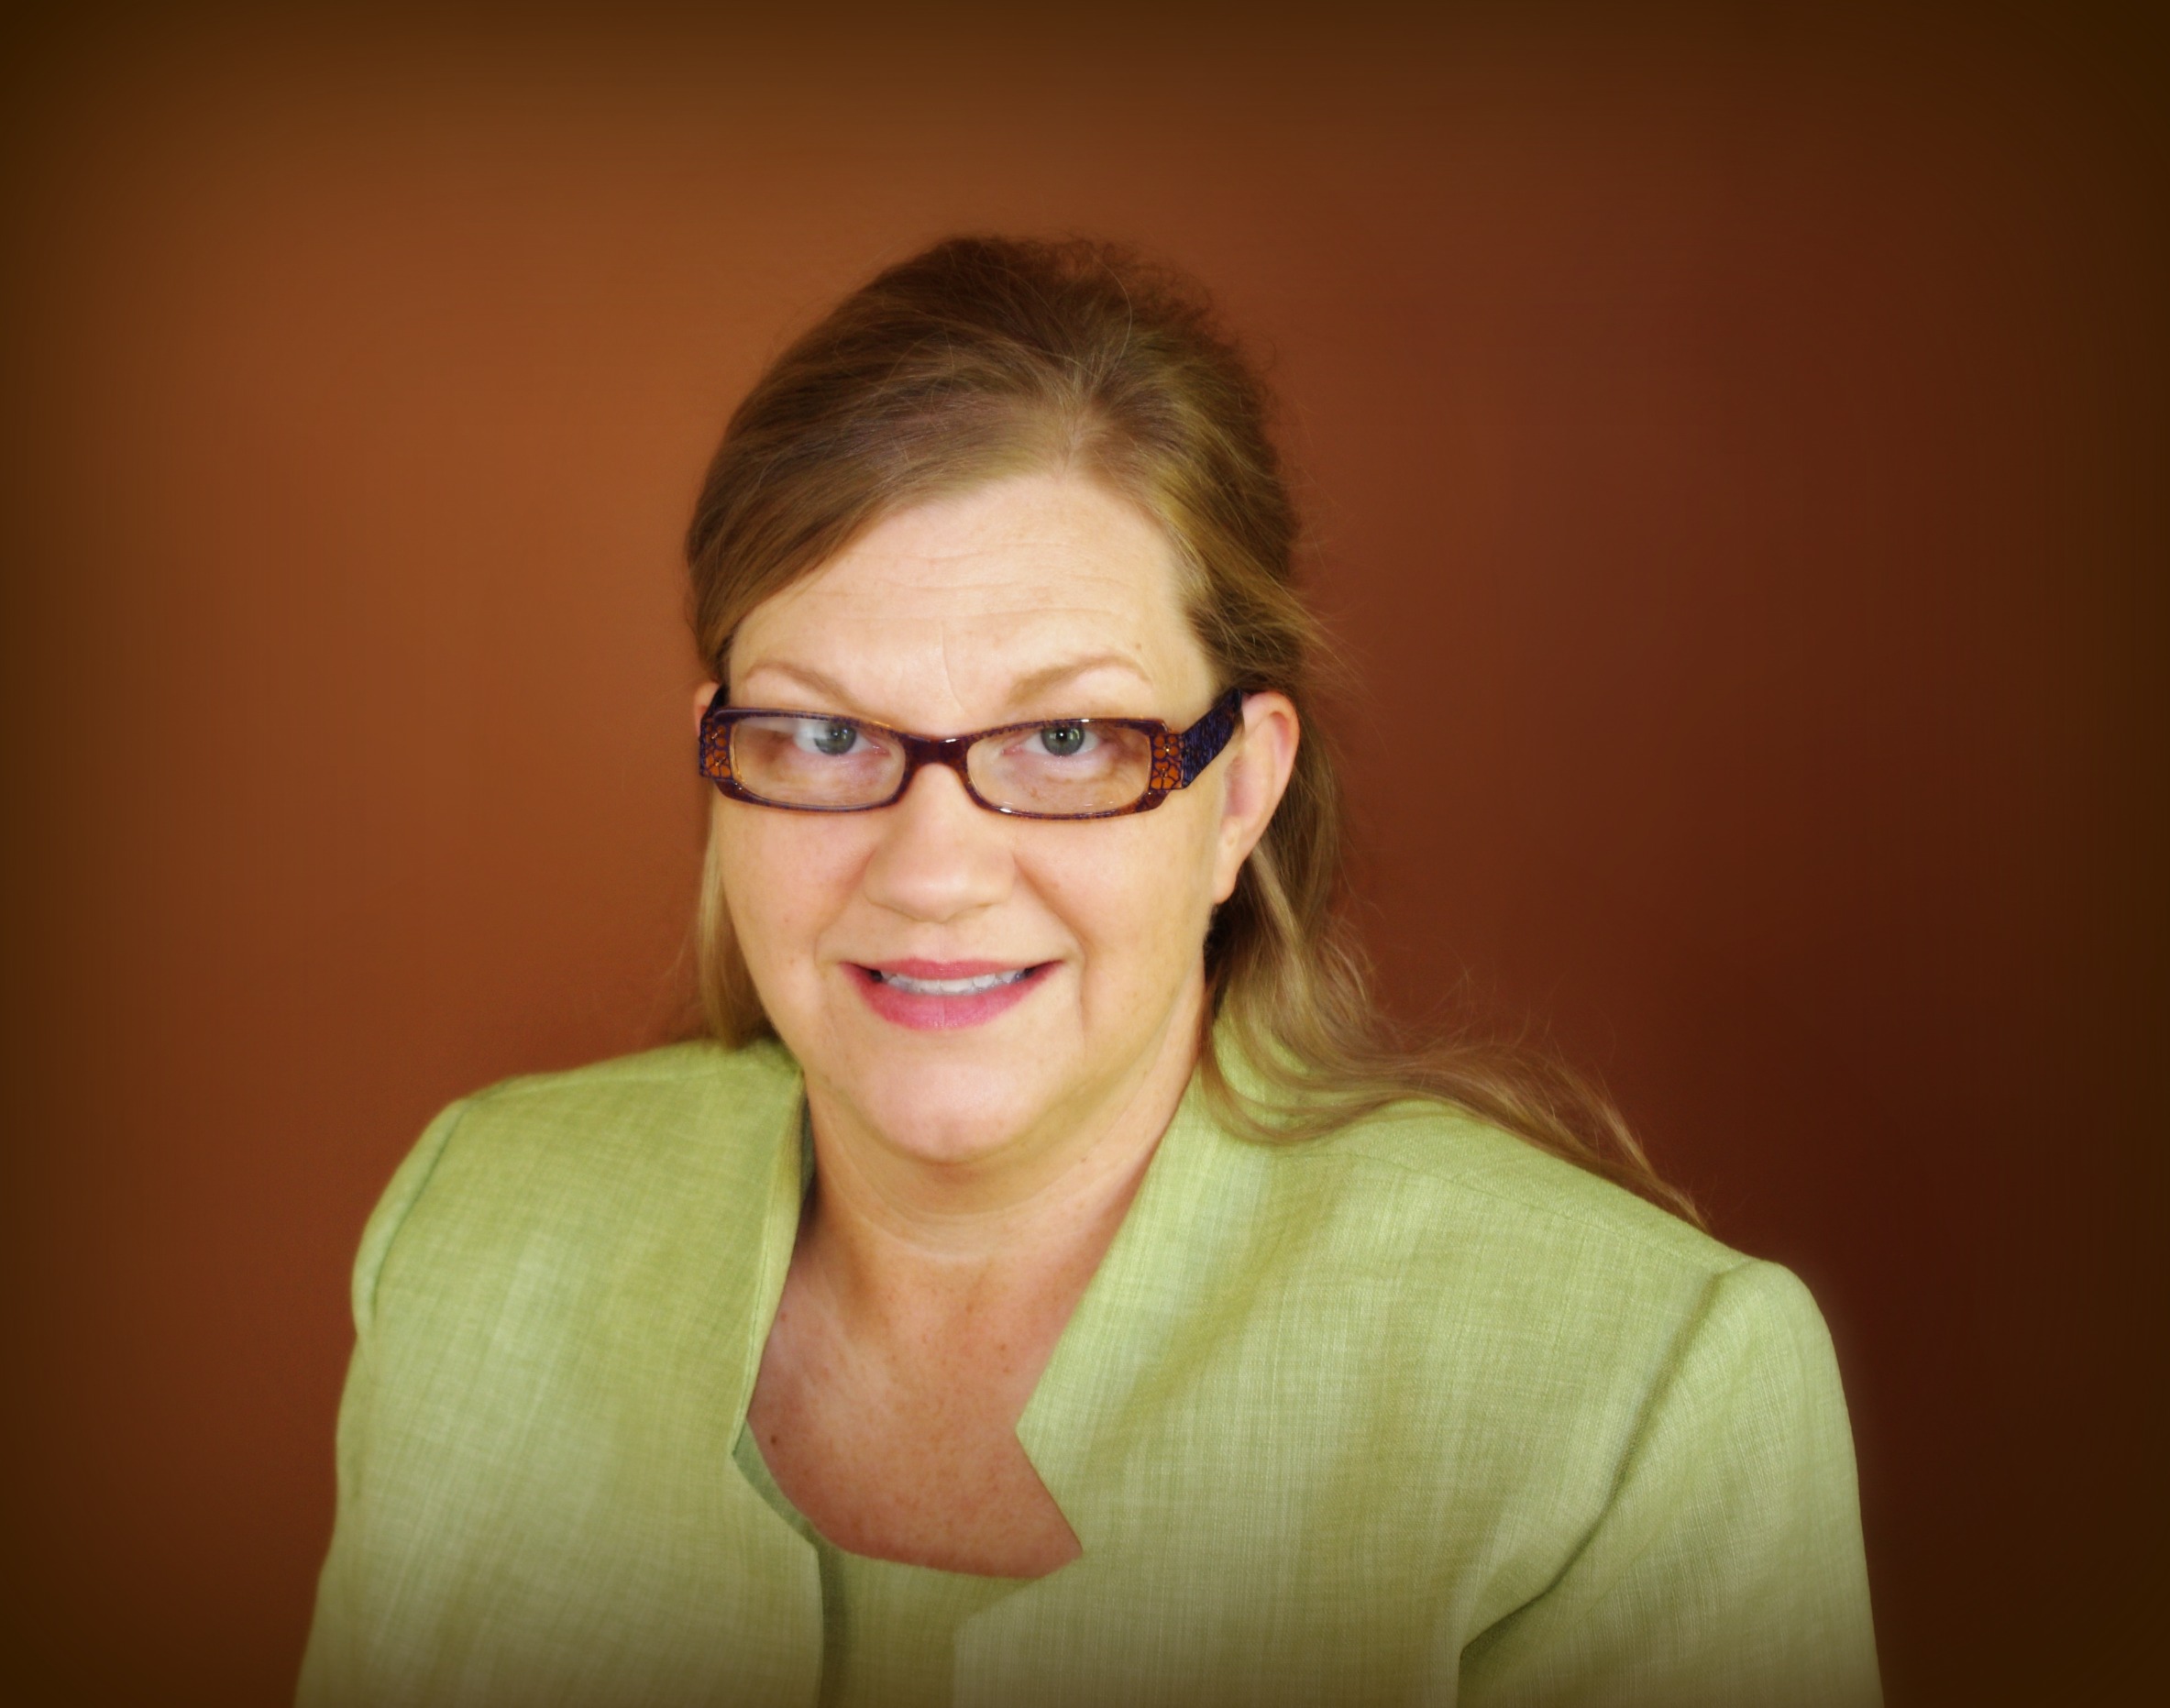 Cindi Kiner - The HR Connection